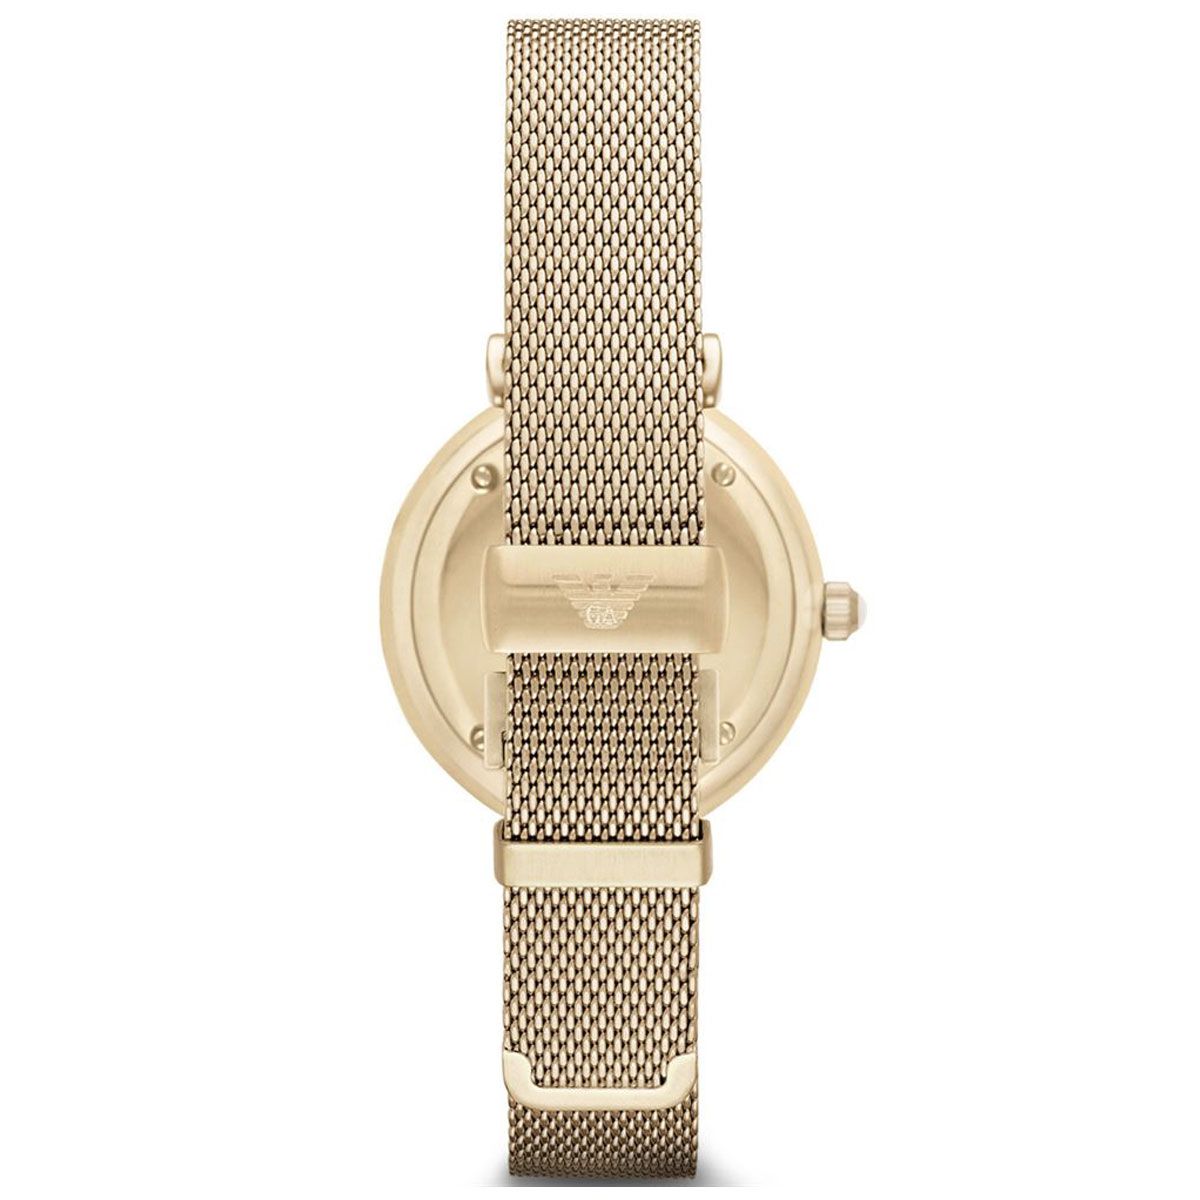 The Ladies Gold Slim Mesh Designer Emporio Armani Watch AR1957 is a fantastic ladies watch. This watch has a 32mm gold stainless steel case with an analogue display. The watch has a gold dial with a gold stainless steel mesh strap and is powered by quartz movement. EAN 4053858628403